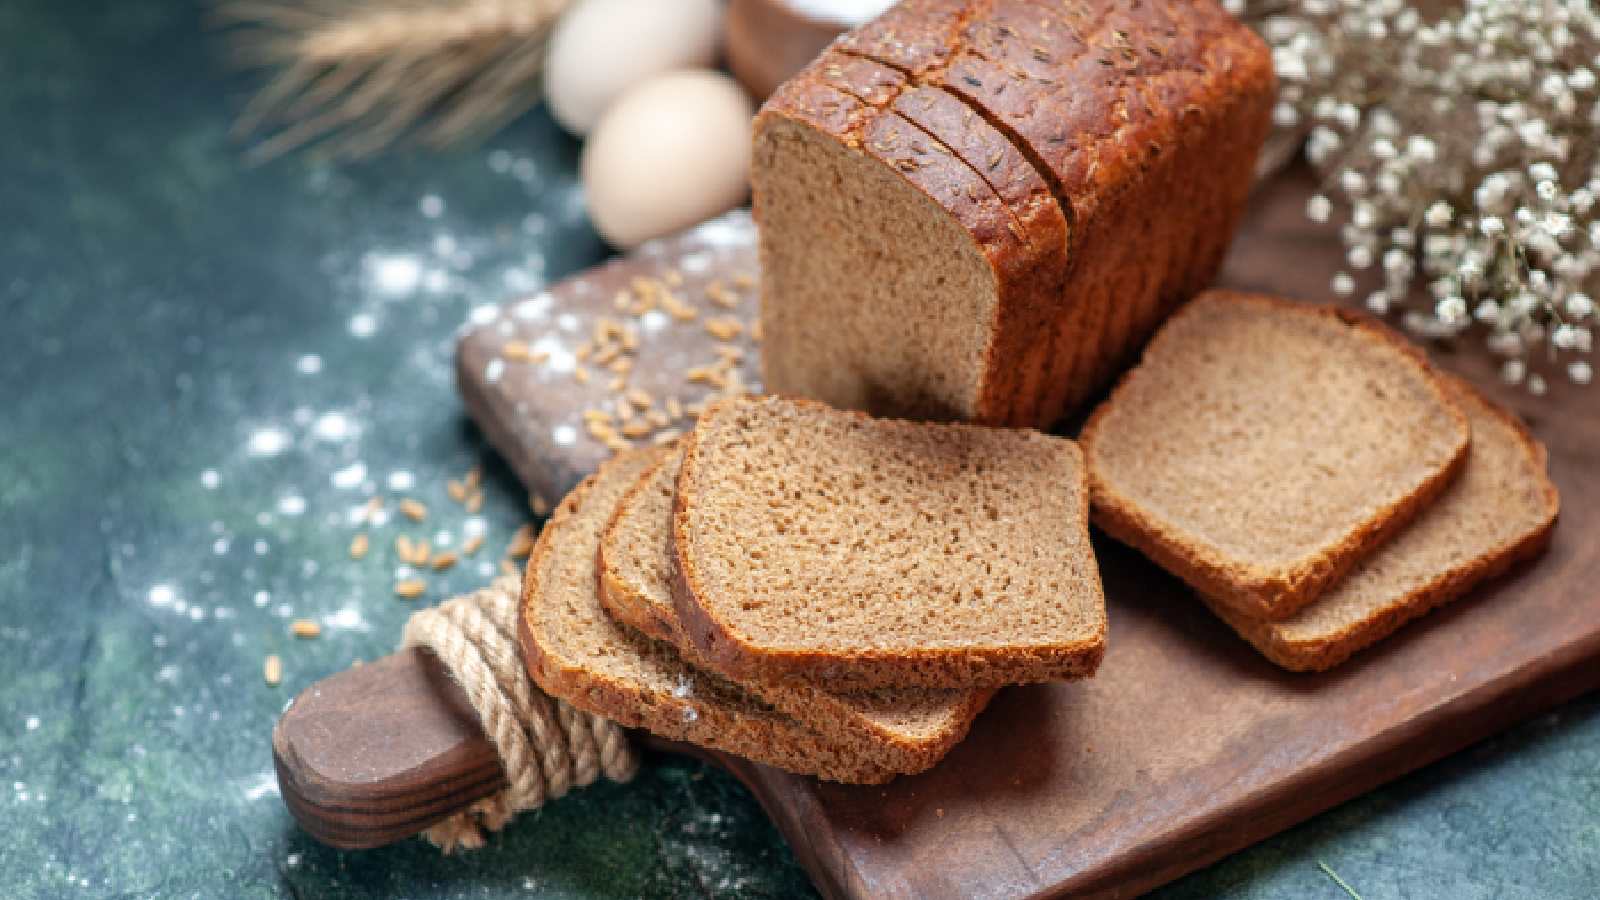 Brown bread: Benefits and ways to eat it